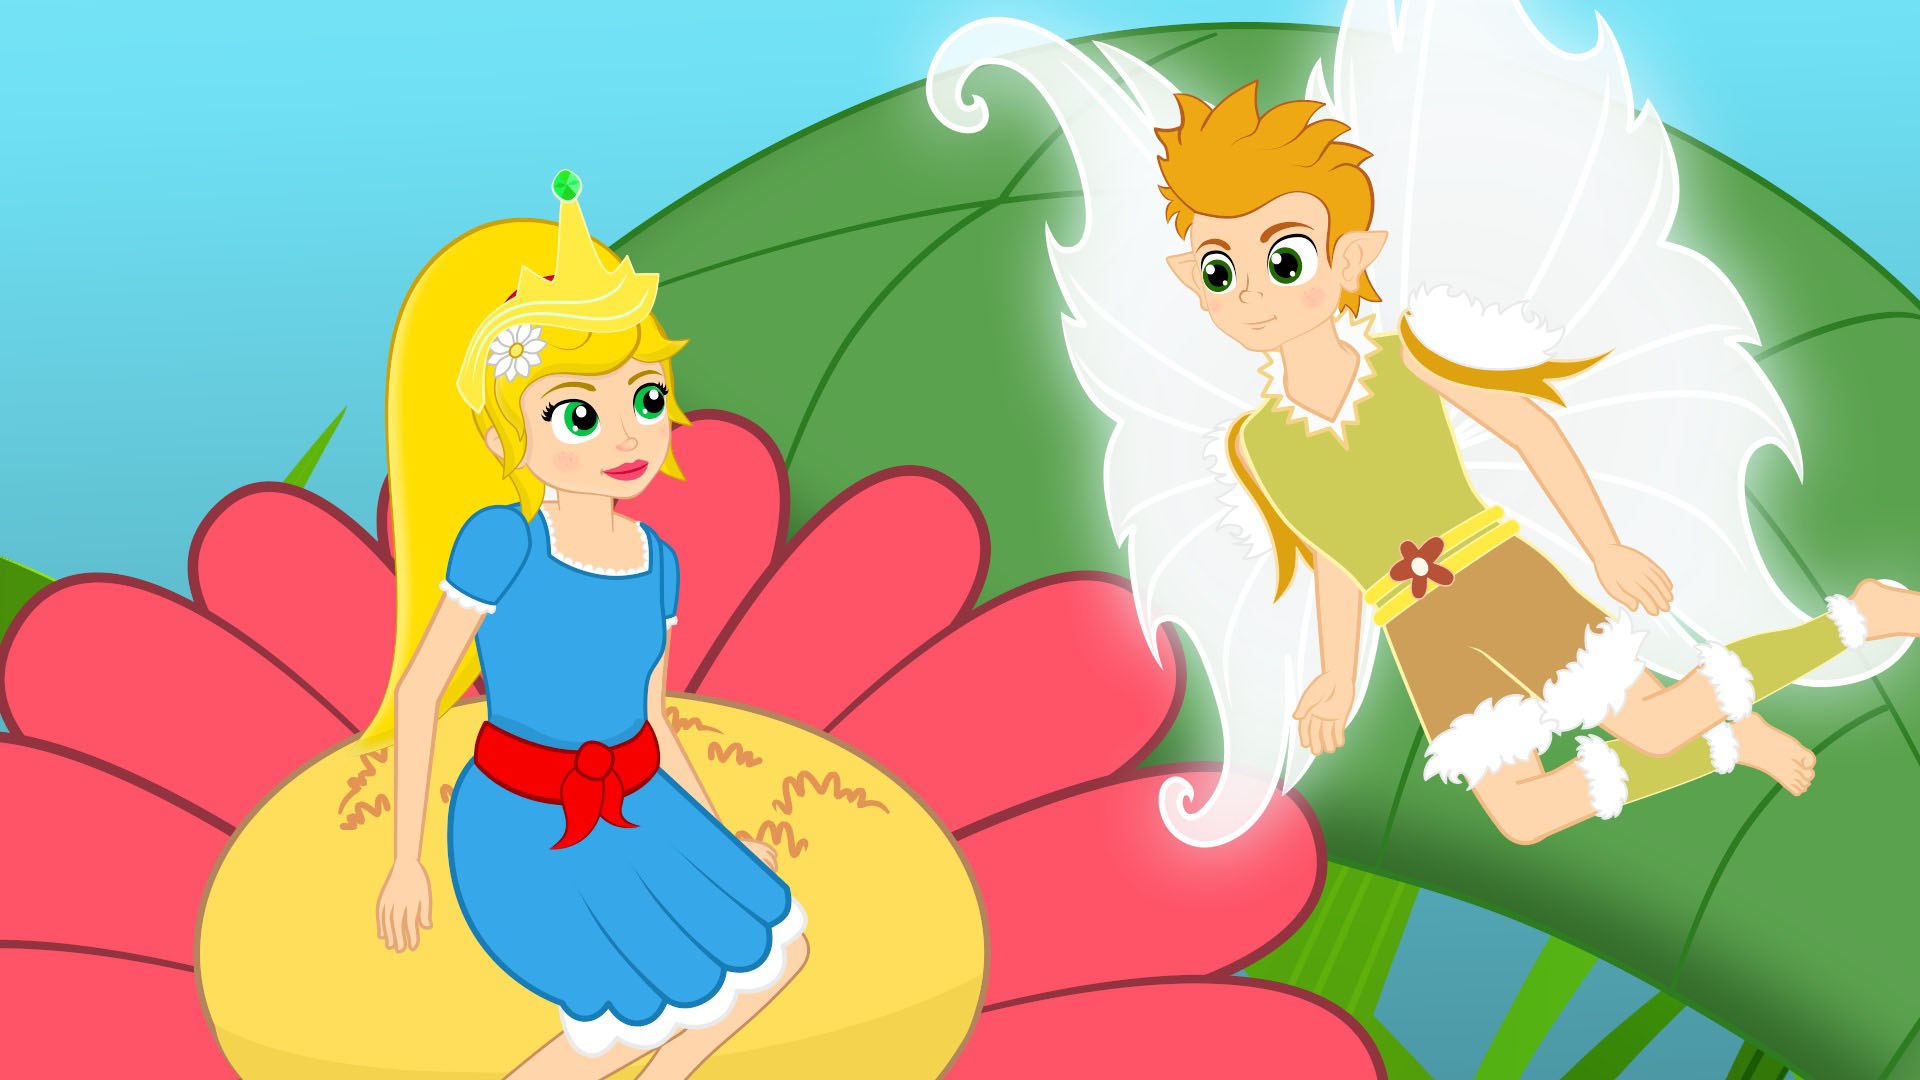 Thumbelina - Fairy Tales and Bedtime Stories for Kids | Okidokido - video  Dailymotion